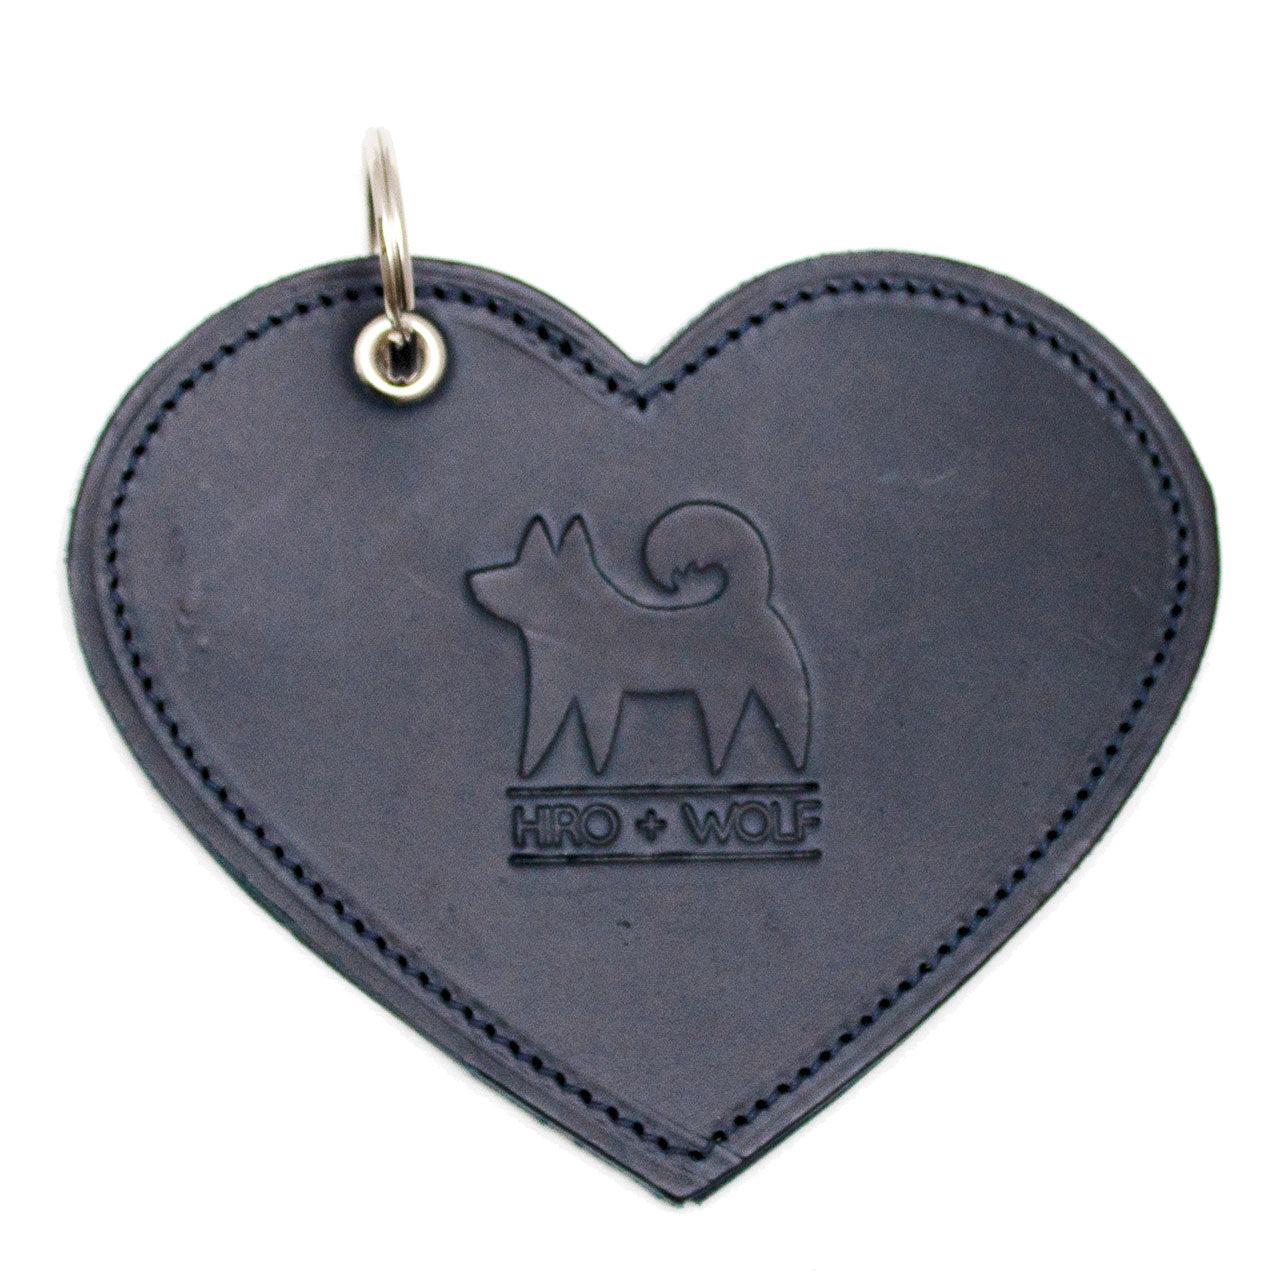 Poo Pouch Heart 'Navy Leather'-Poo Pouch-Hiro + Wolf